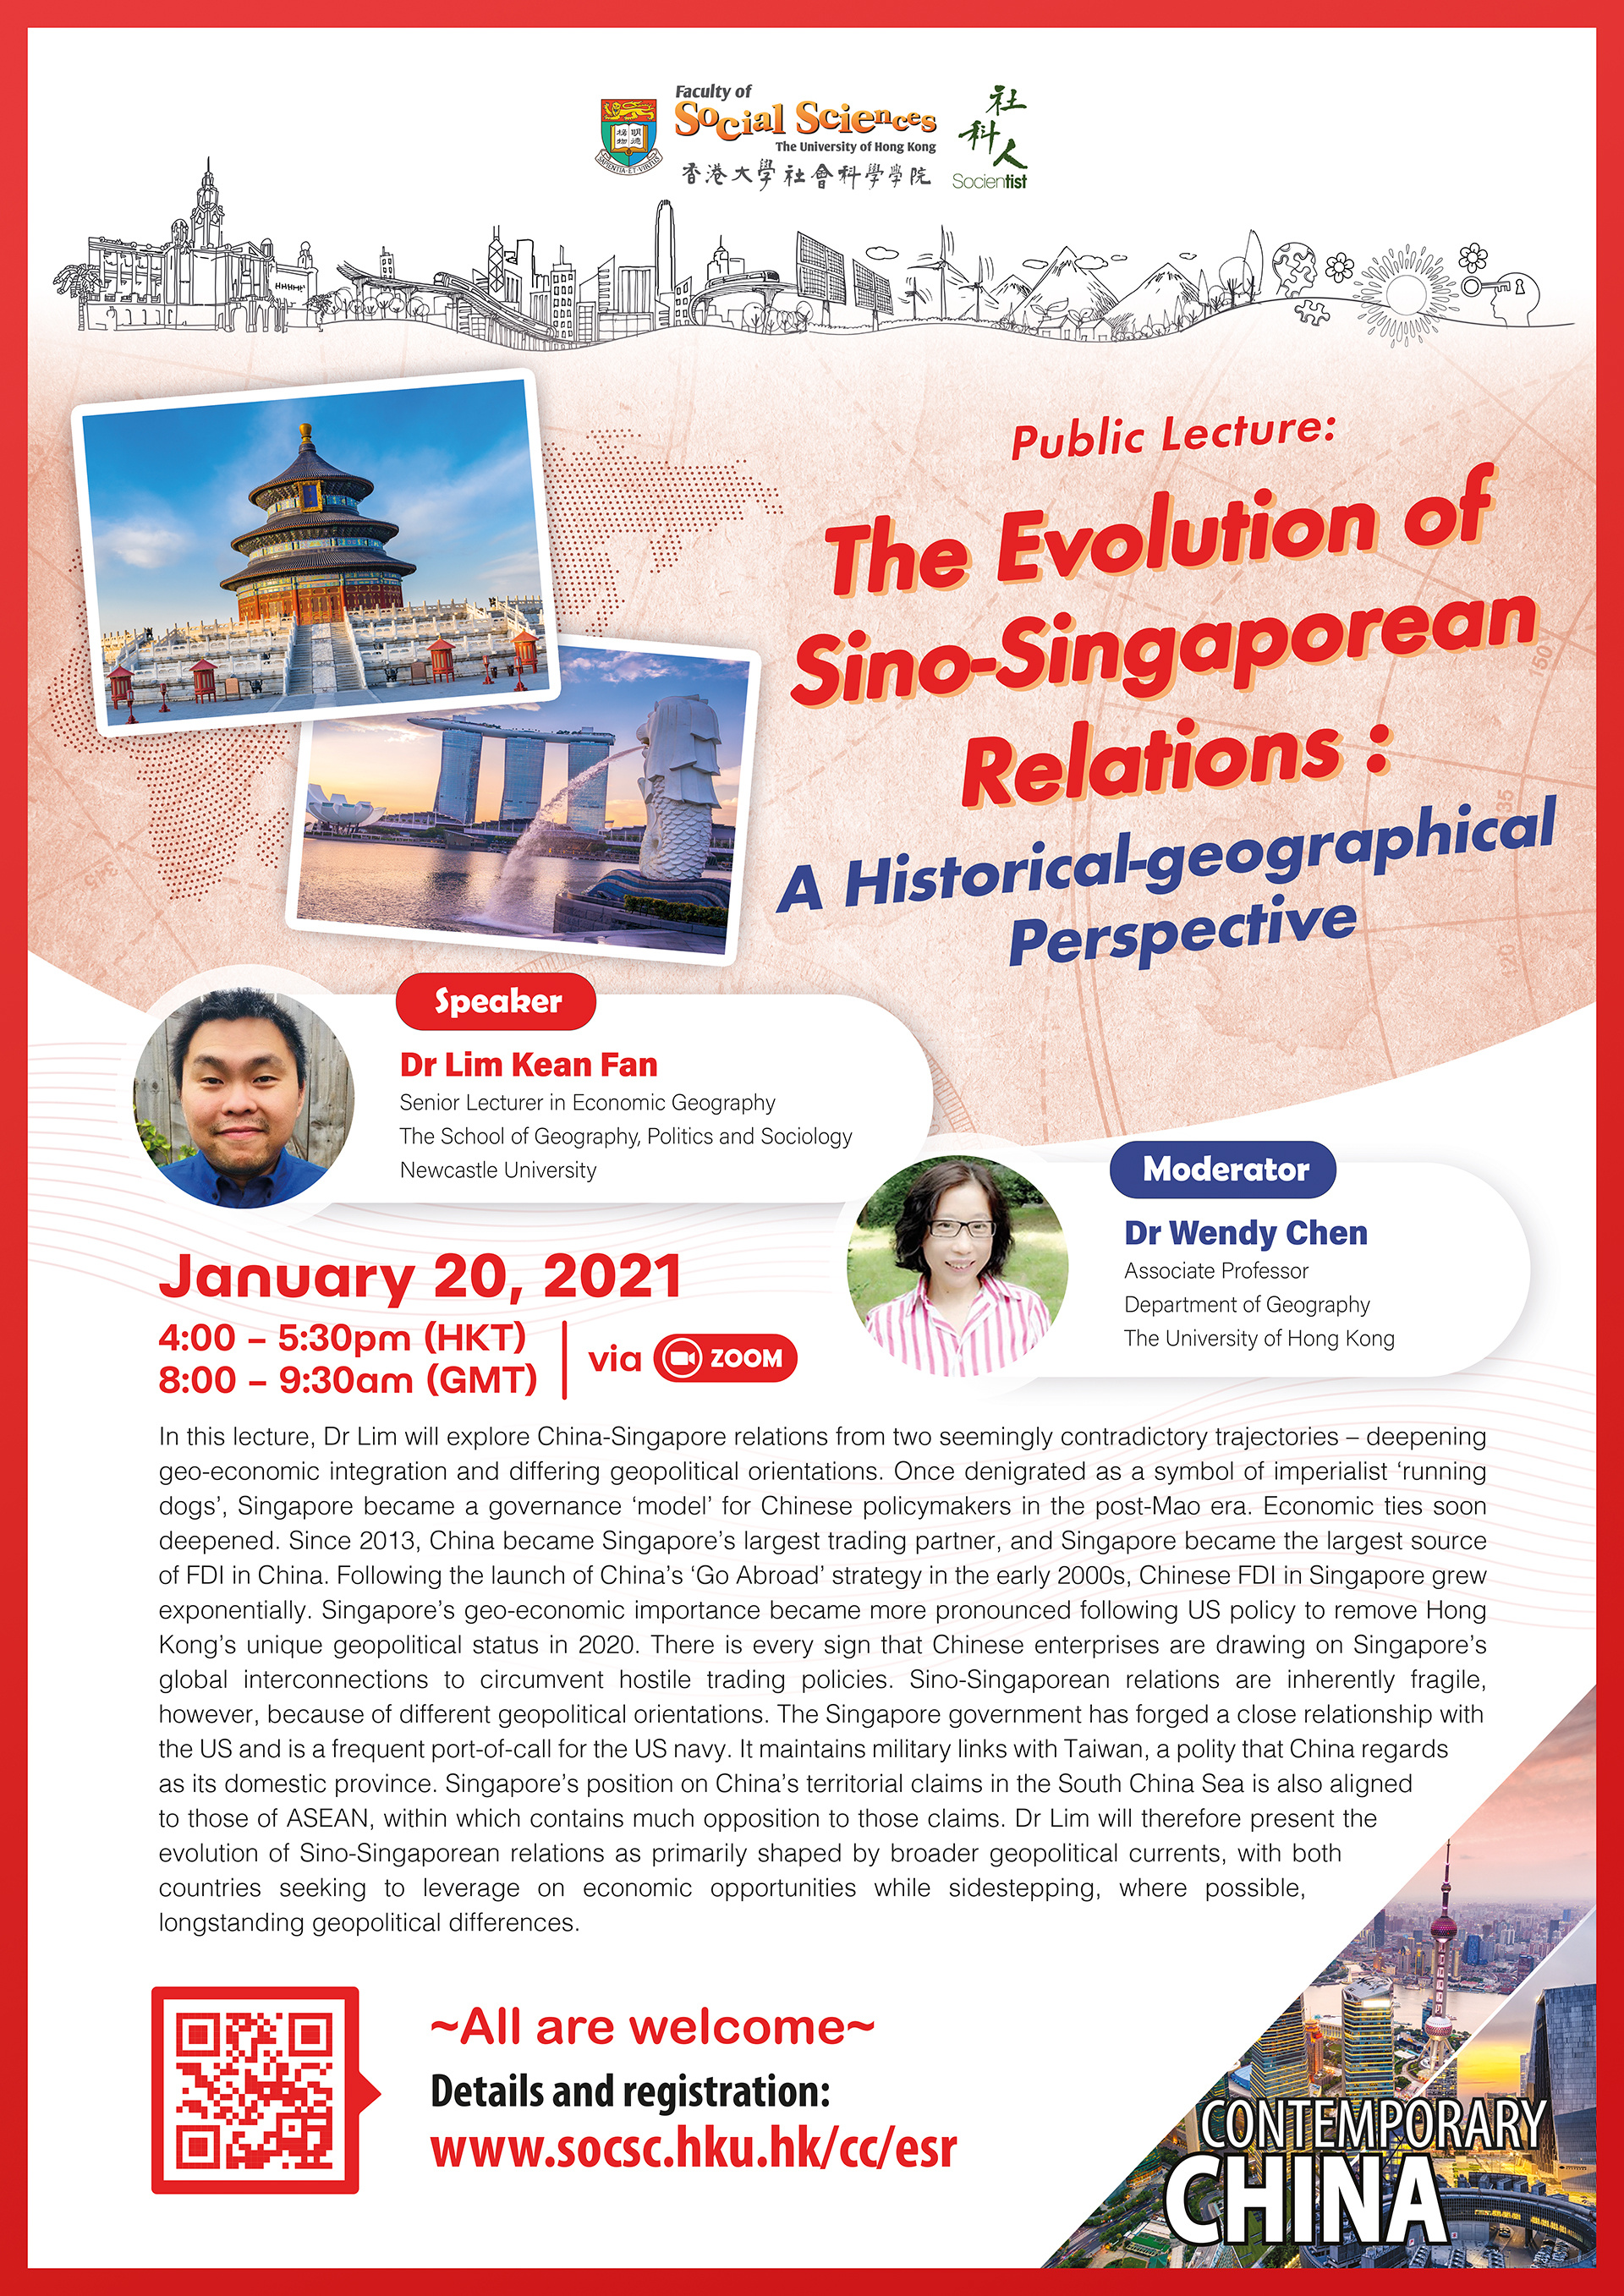 Contemporary China Public Lecture - The Evolution of Sino-Singaporean Relations: A Historical-geographical Perspective (January 20, 4pm)